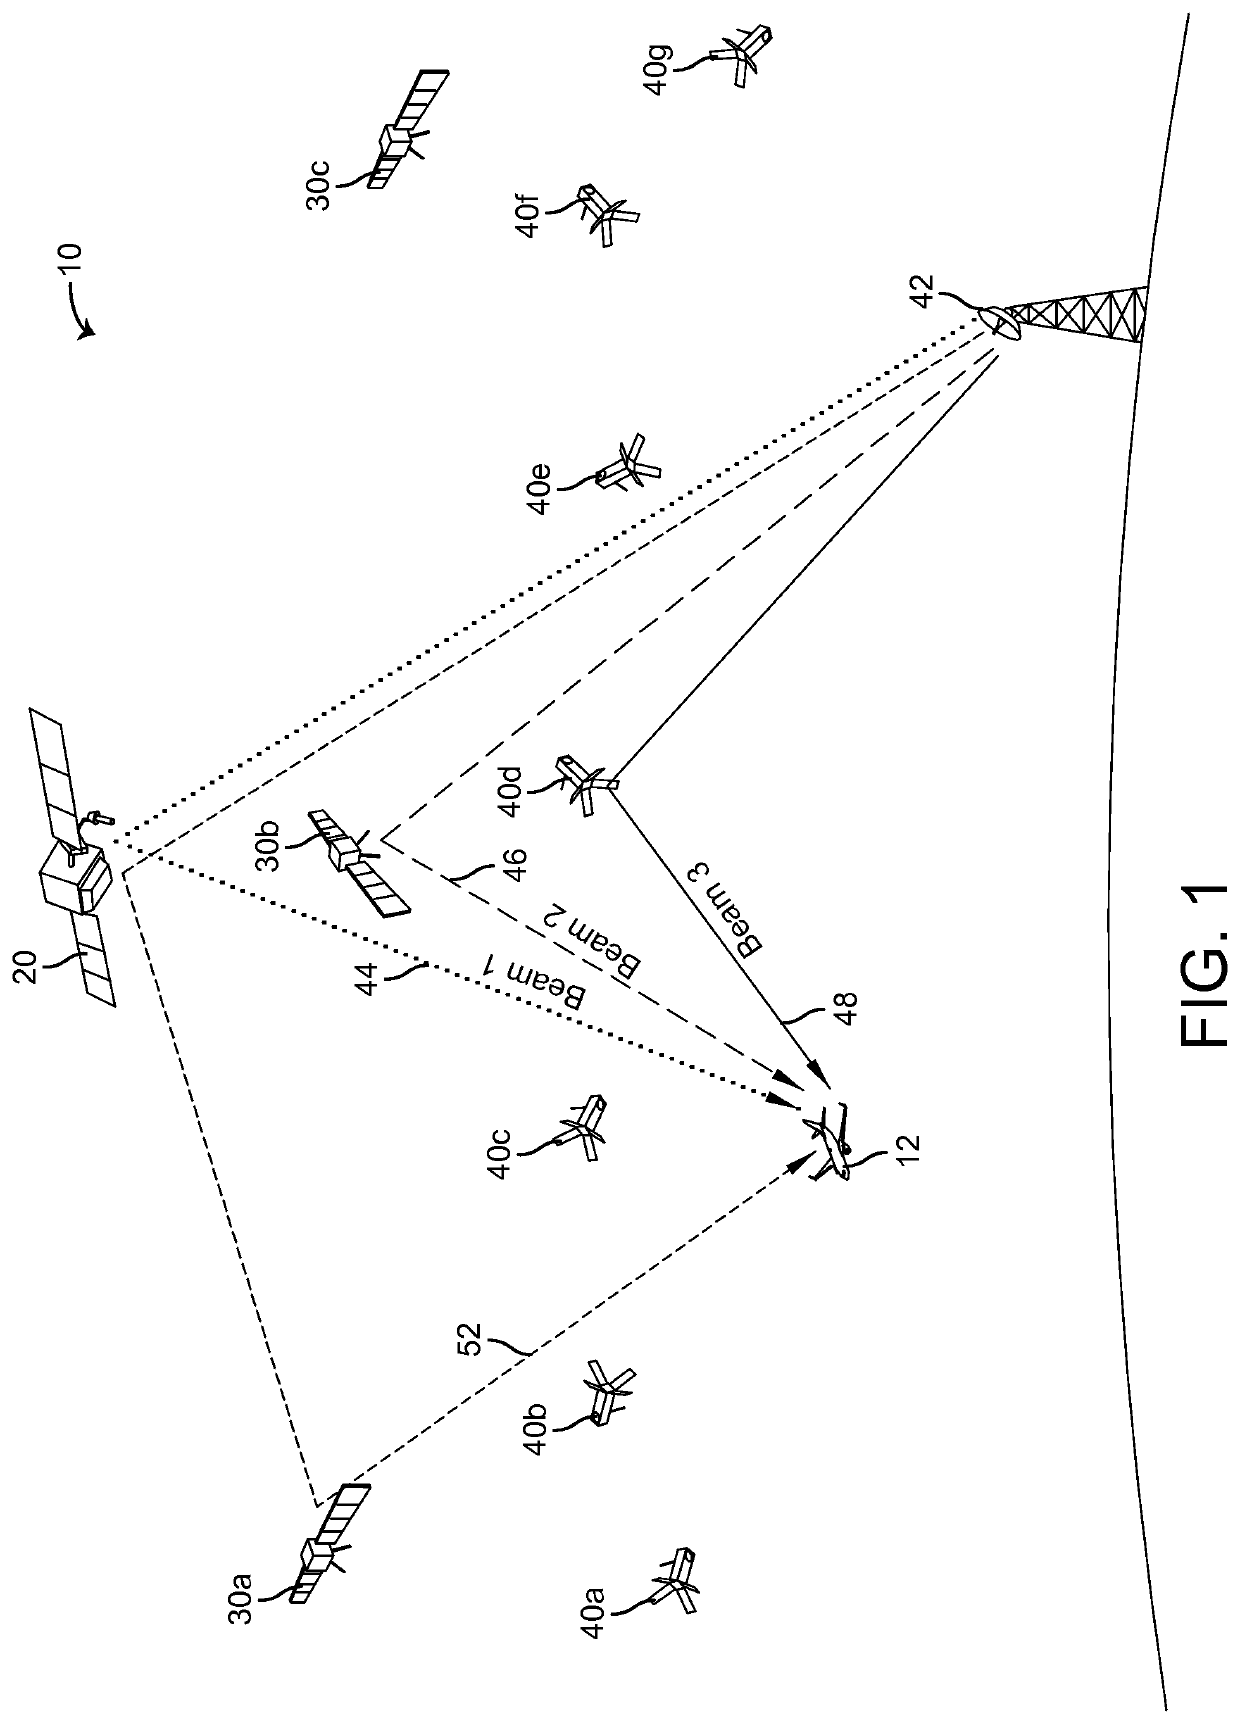 System and method for an aircraft communicating with multiple satellite constellations